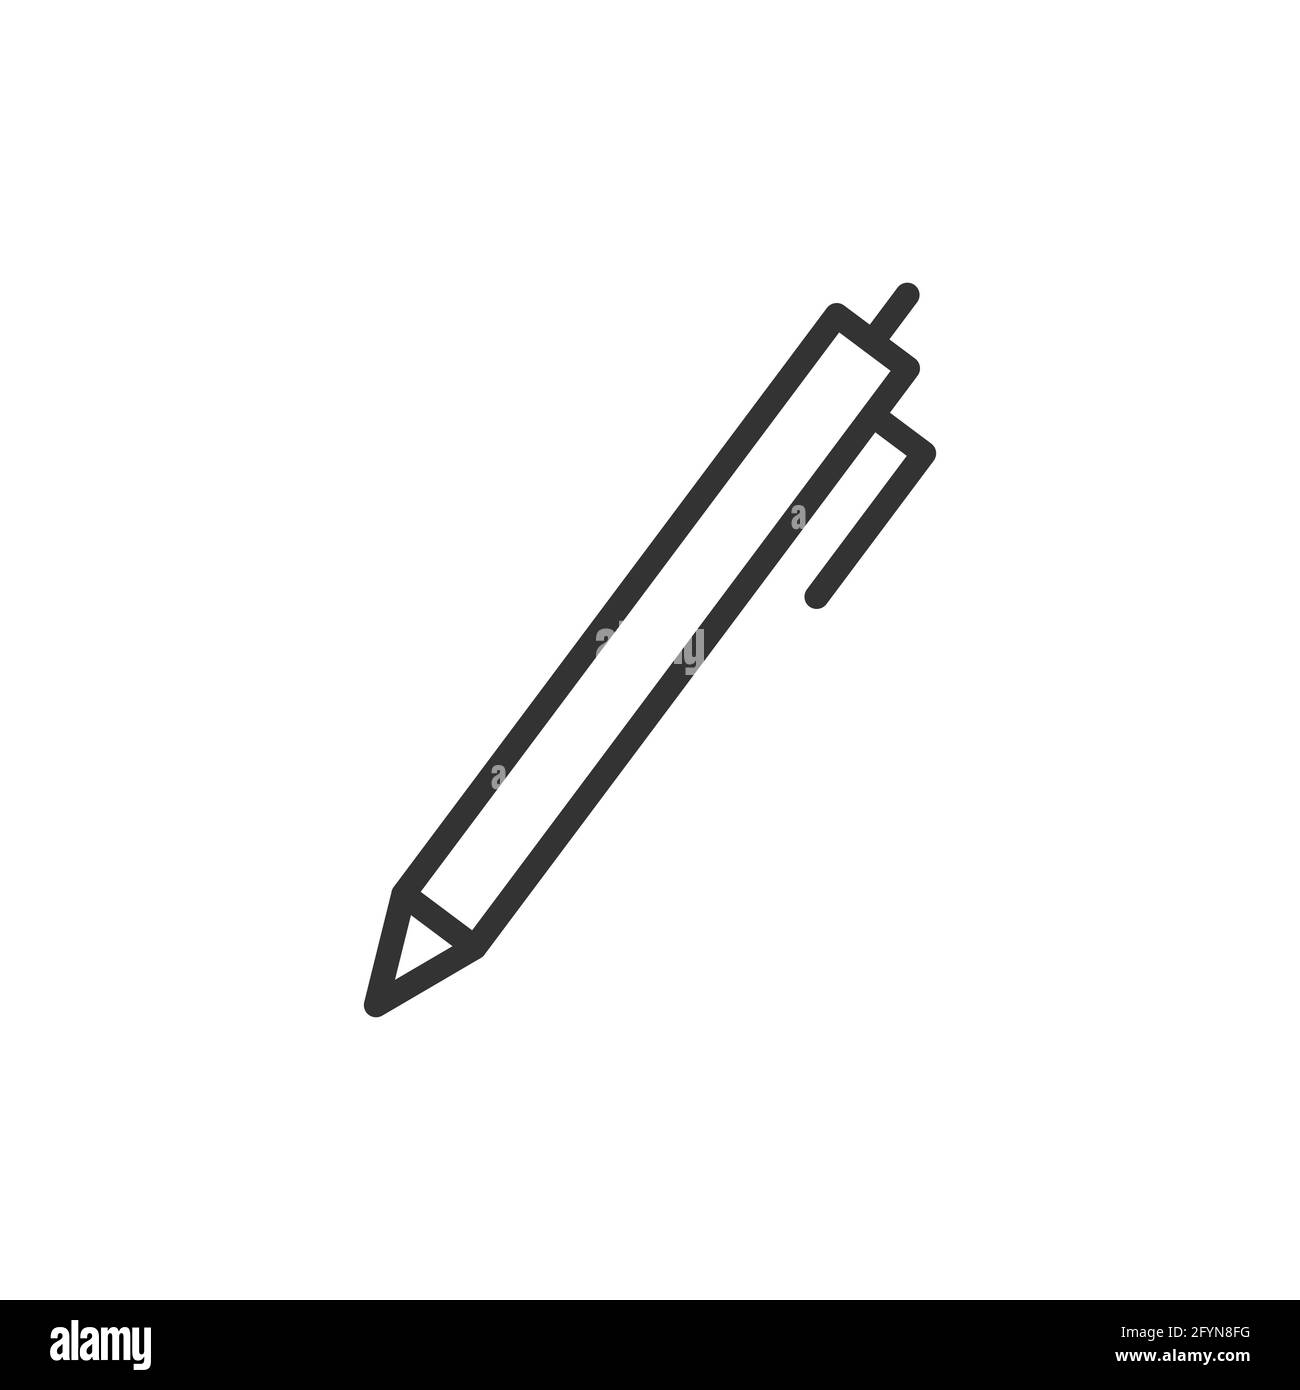 Pen icon. Business symbol. Pencil black silhouette. Vector illustration isolated on white Stock Vector